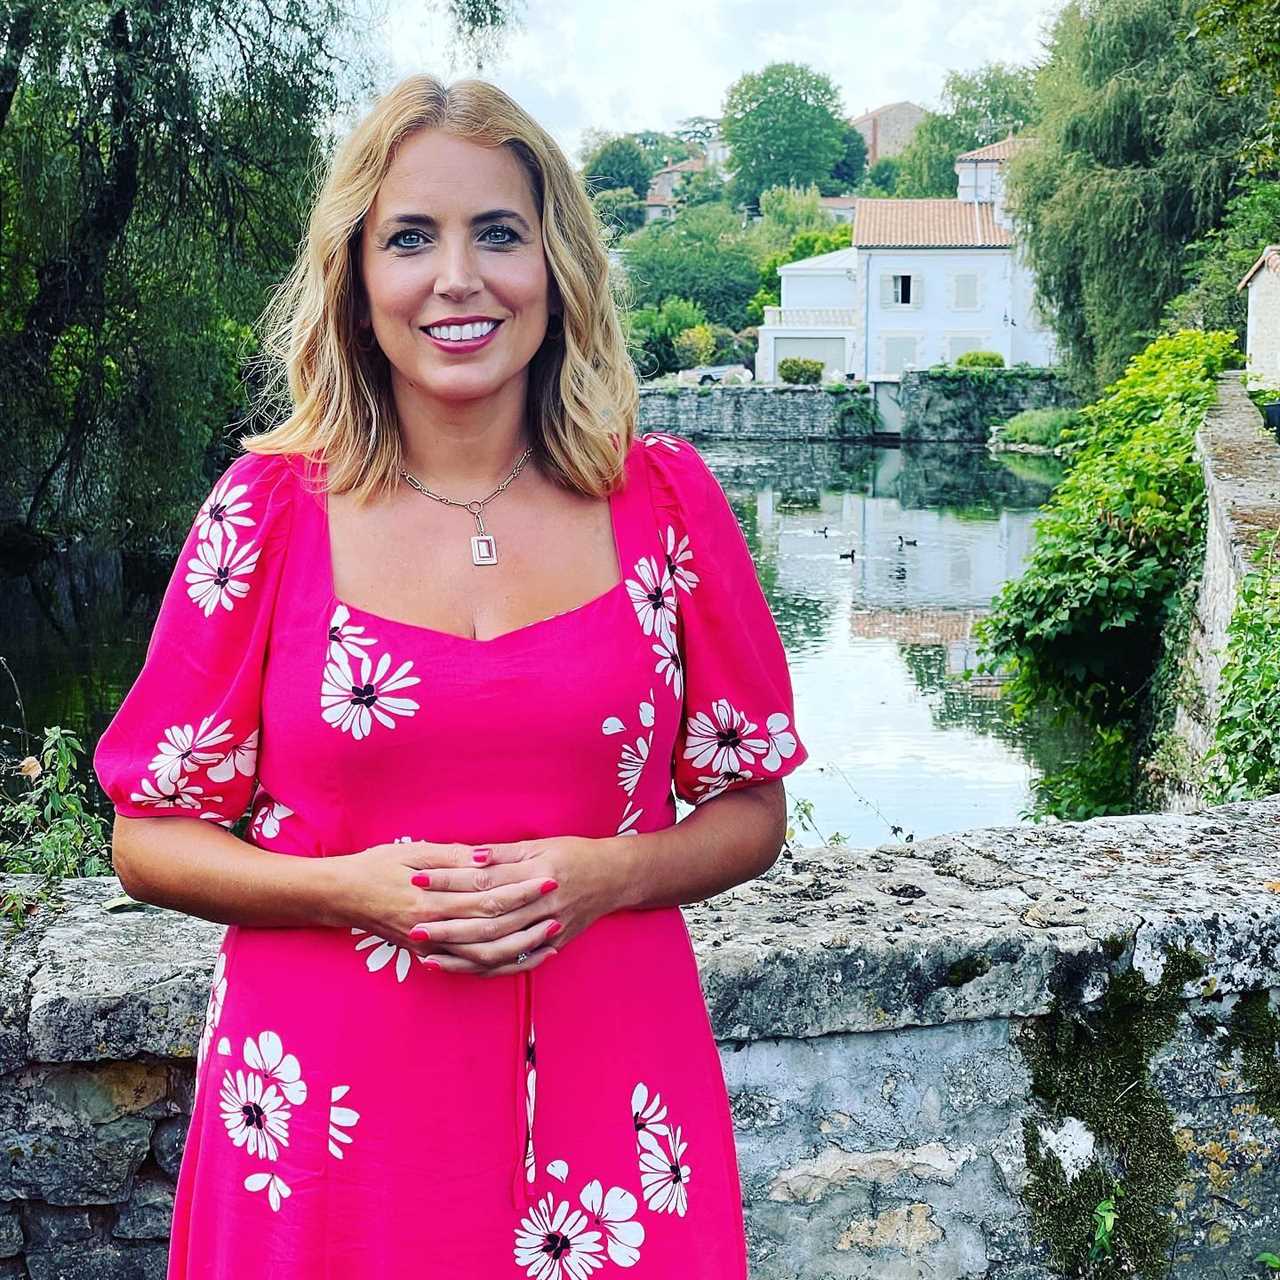 A Place In The Sun’s Jasmine Harman shows off the results of her incredible weight loss transformation